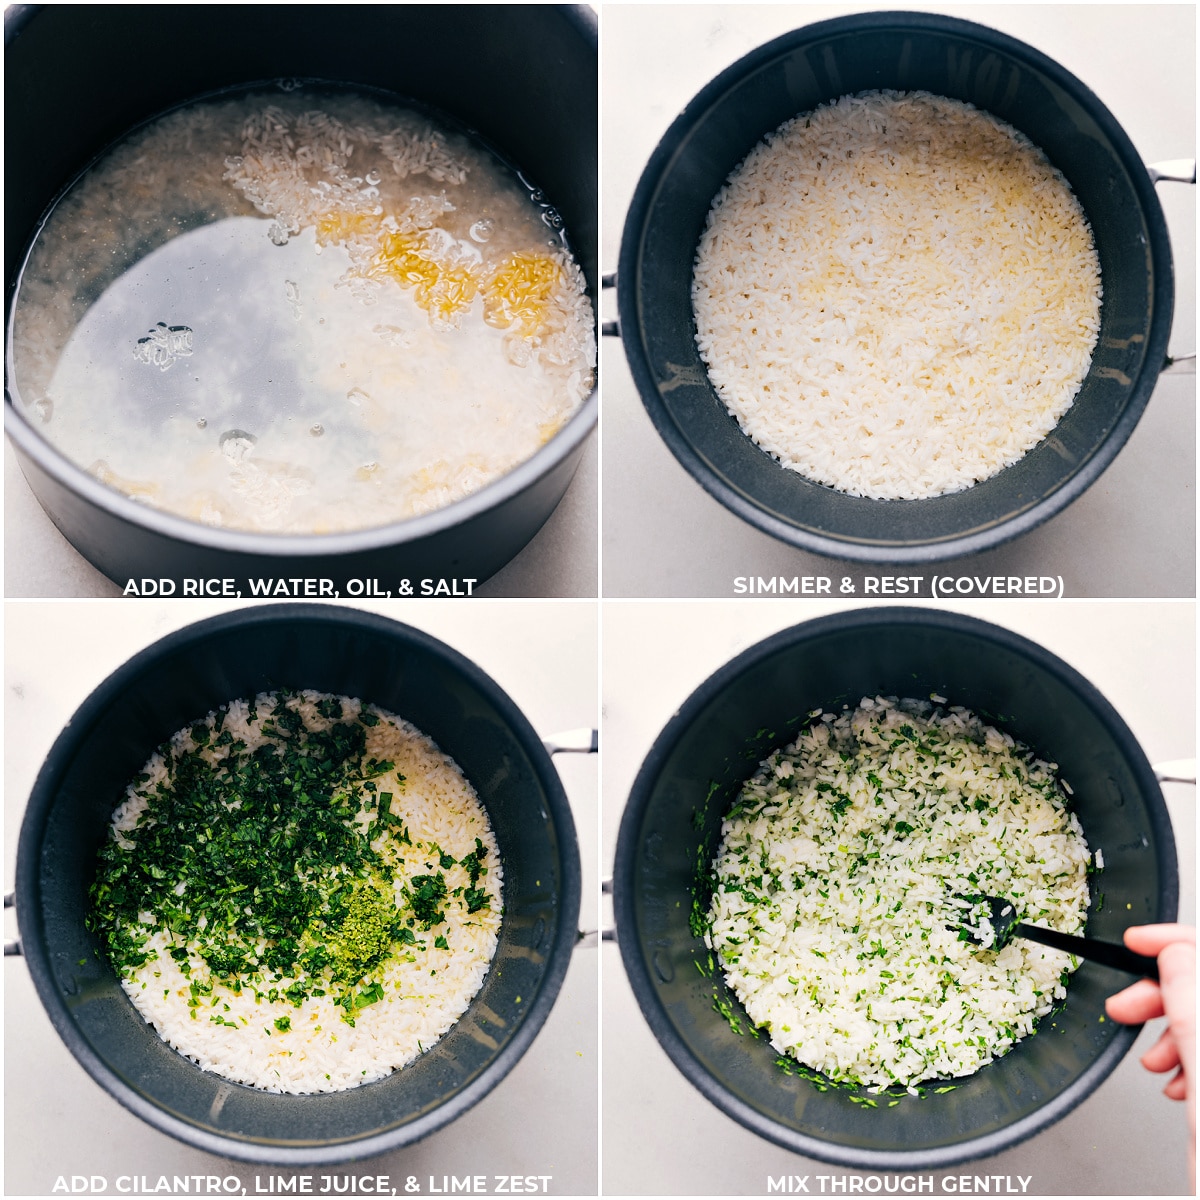 Rice, water, oil, and salt being added to a pot and cooked, then the cilantro, lime juice, and lime zest being mixed through for this Cilantro-Lime Rice.